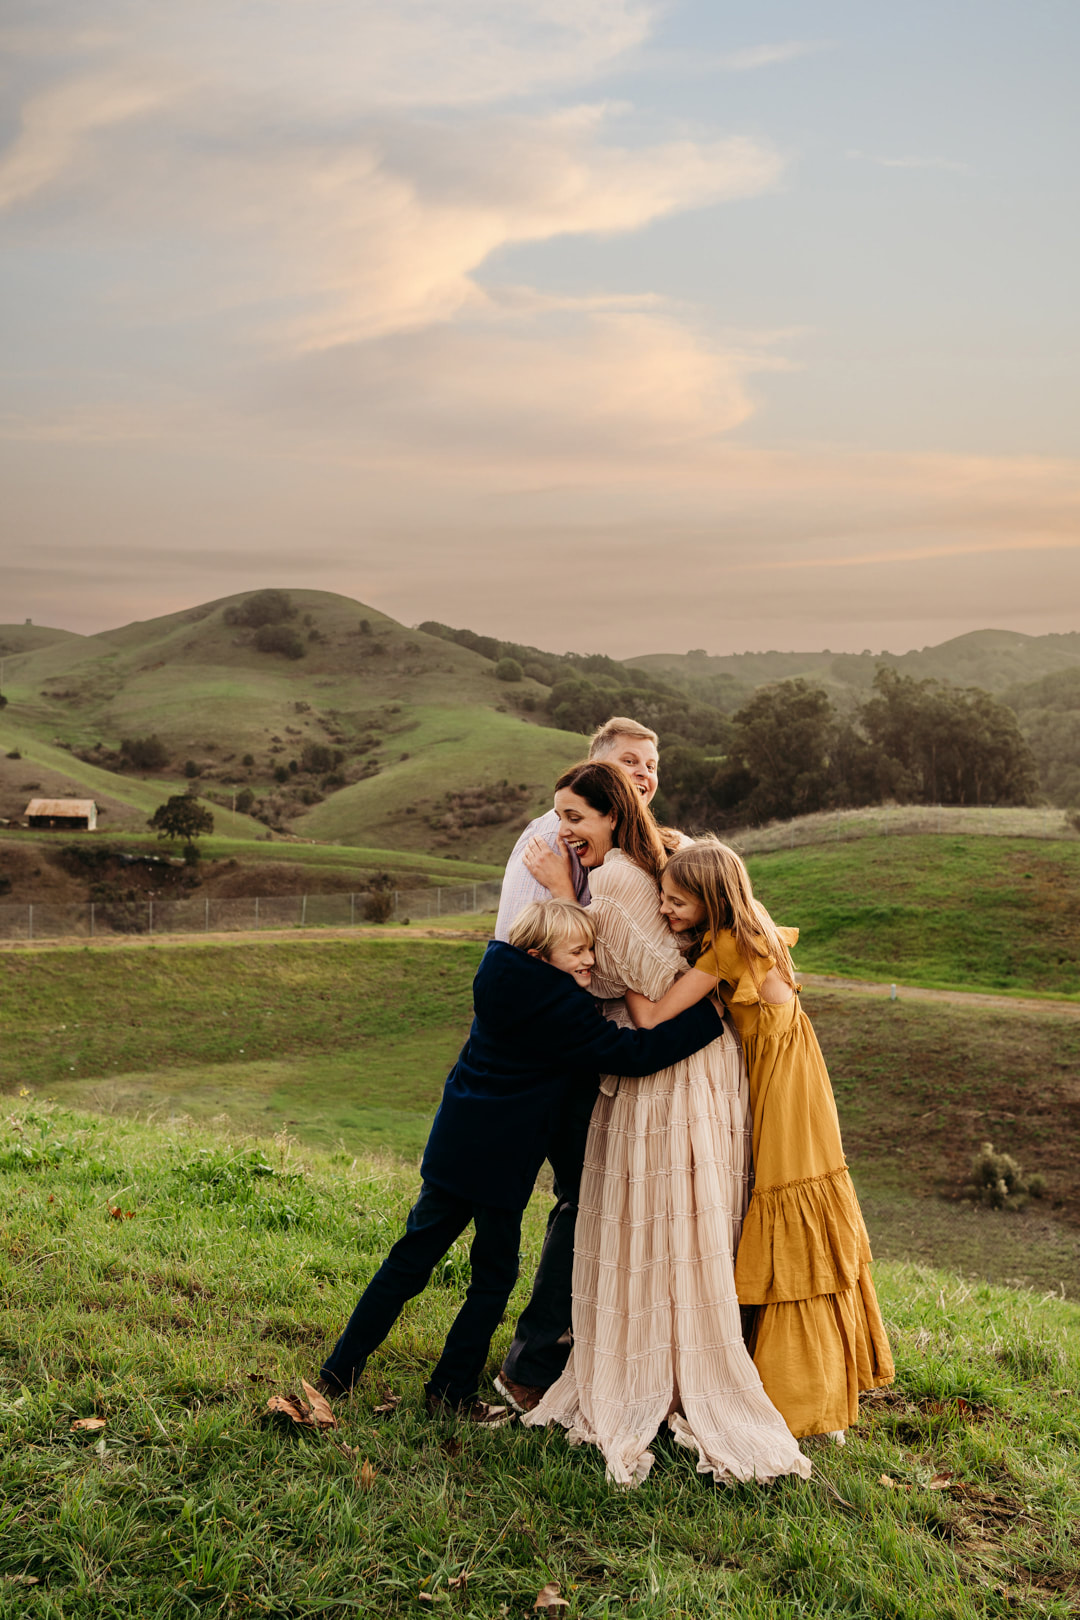 A family hugs and laughs with the rolling hills of Pleasanton and a small barn in the background.